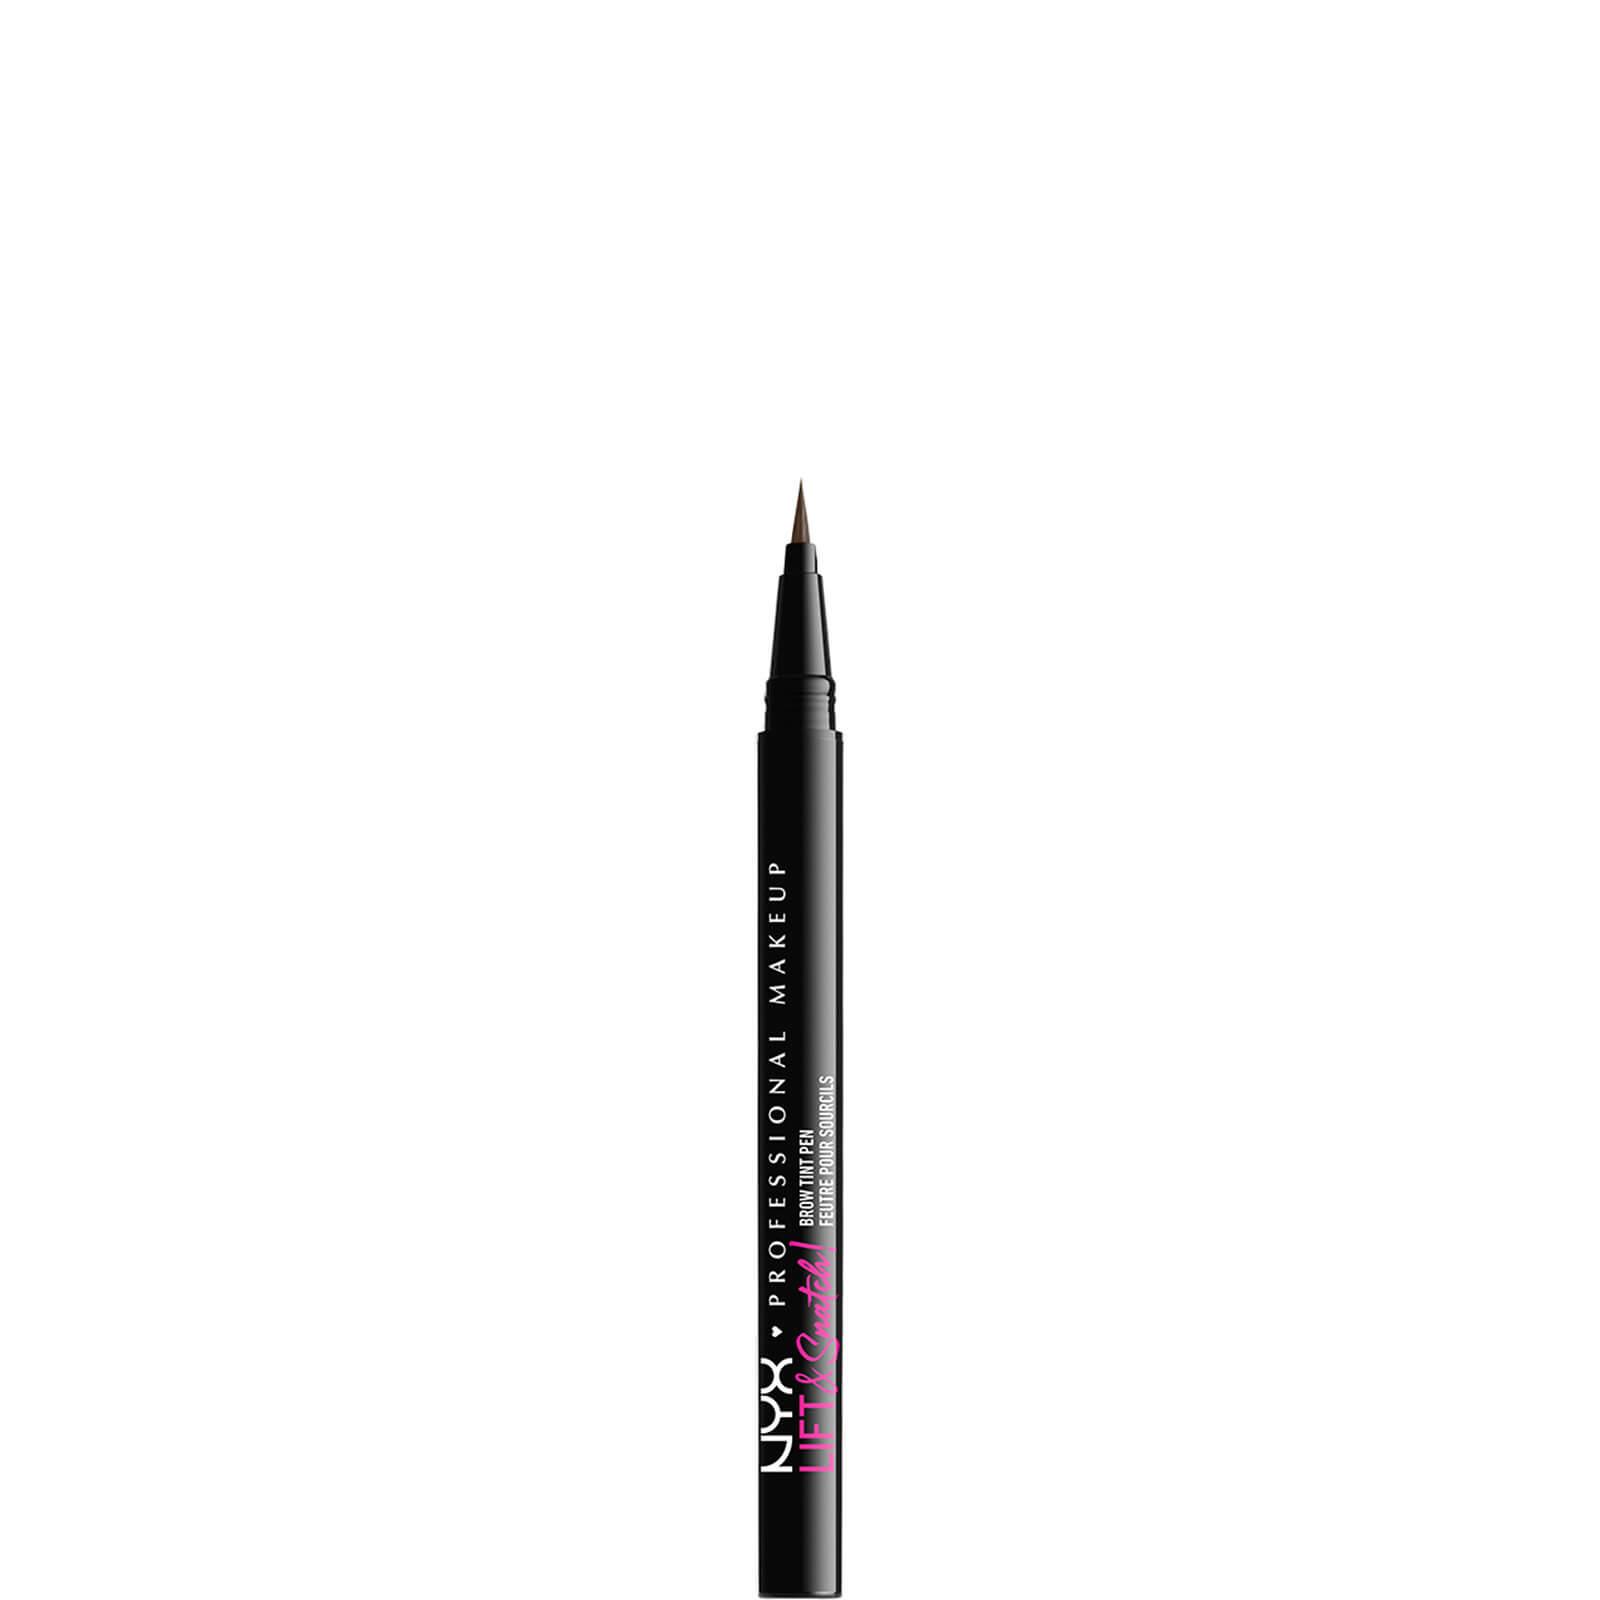 NYX Professional Makeup Lift and Snatch Brow Tint Pen 3g (Various Shades) - Ash Brown